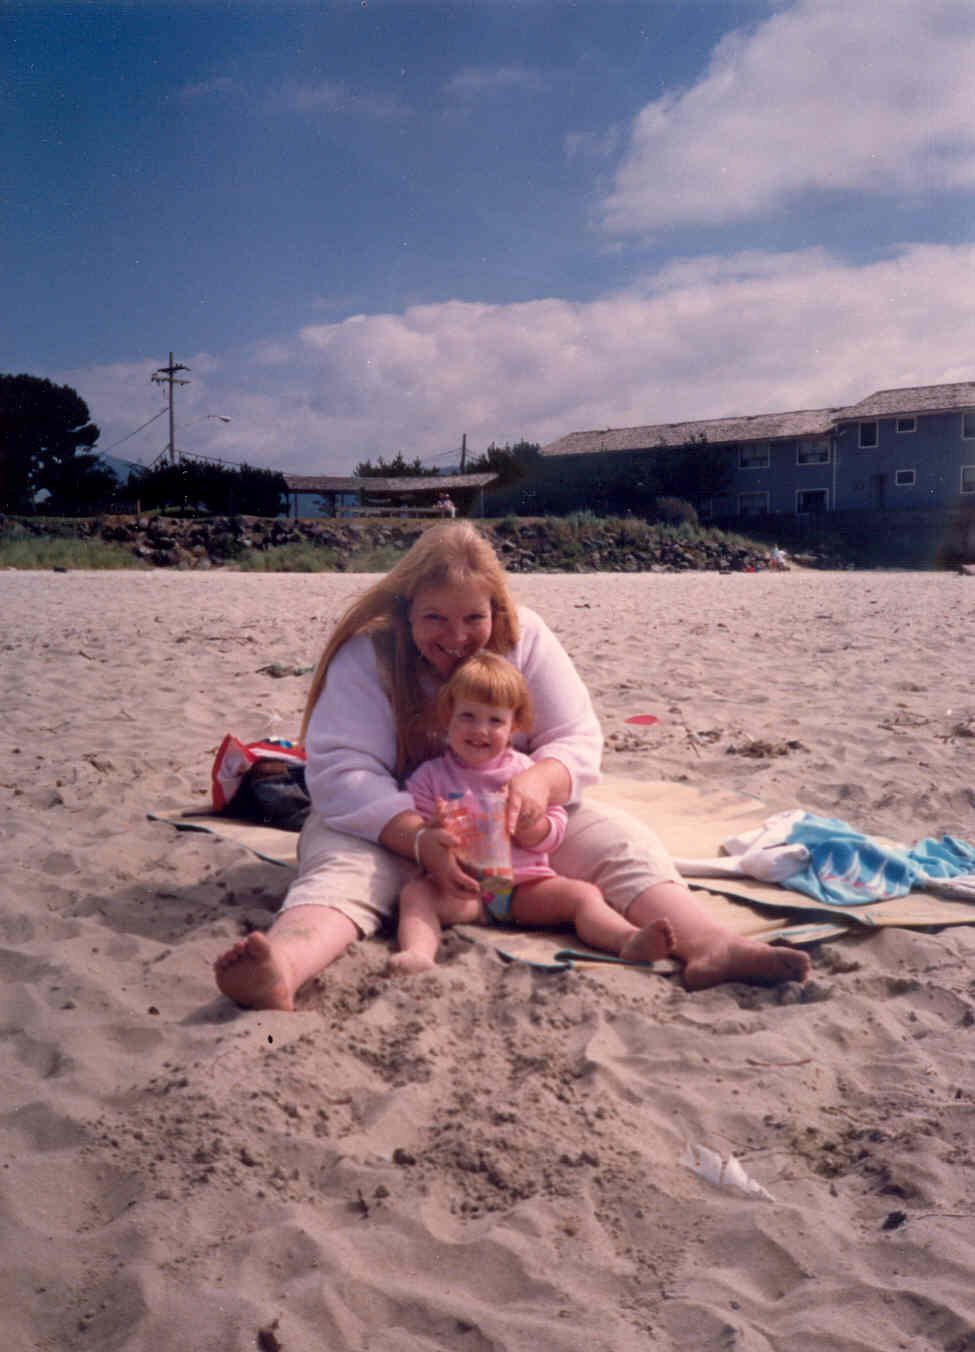 [Lindsey+and+me+cannon+beach+1989.jpg]